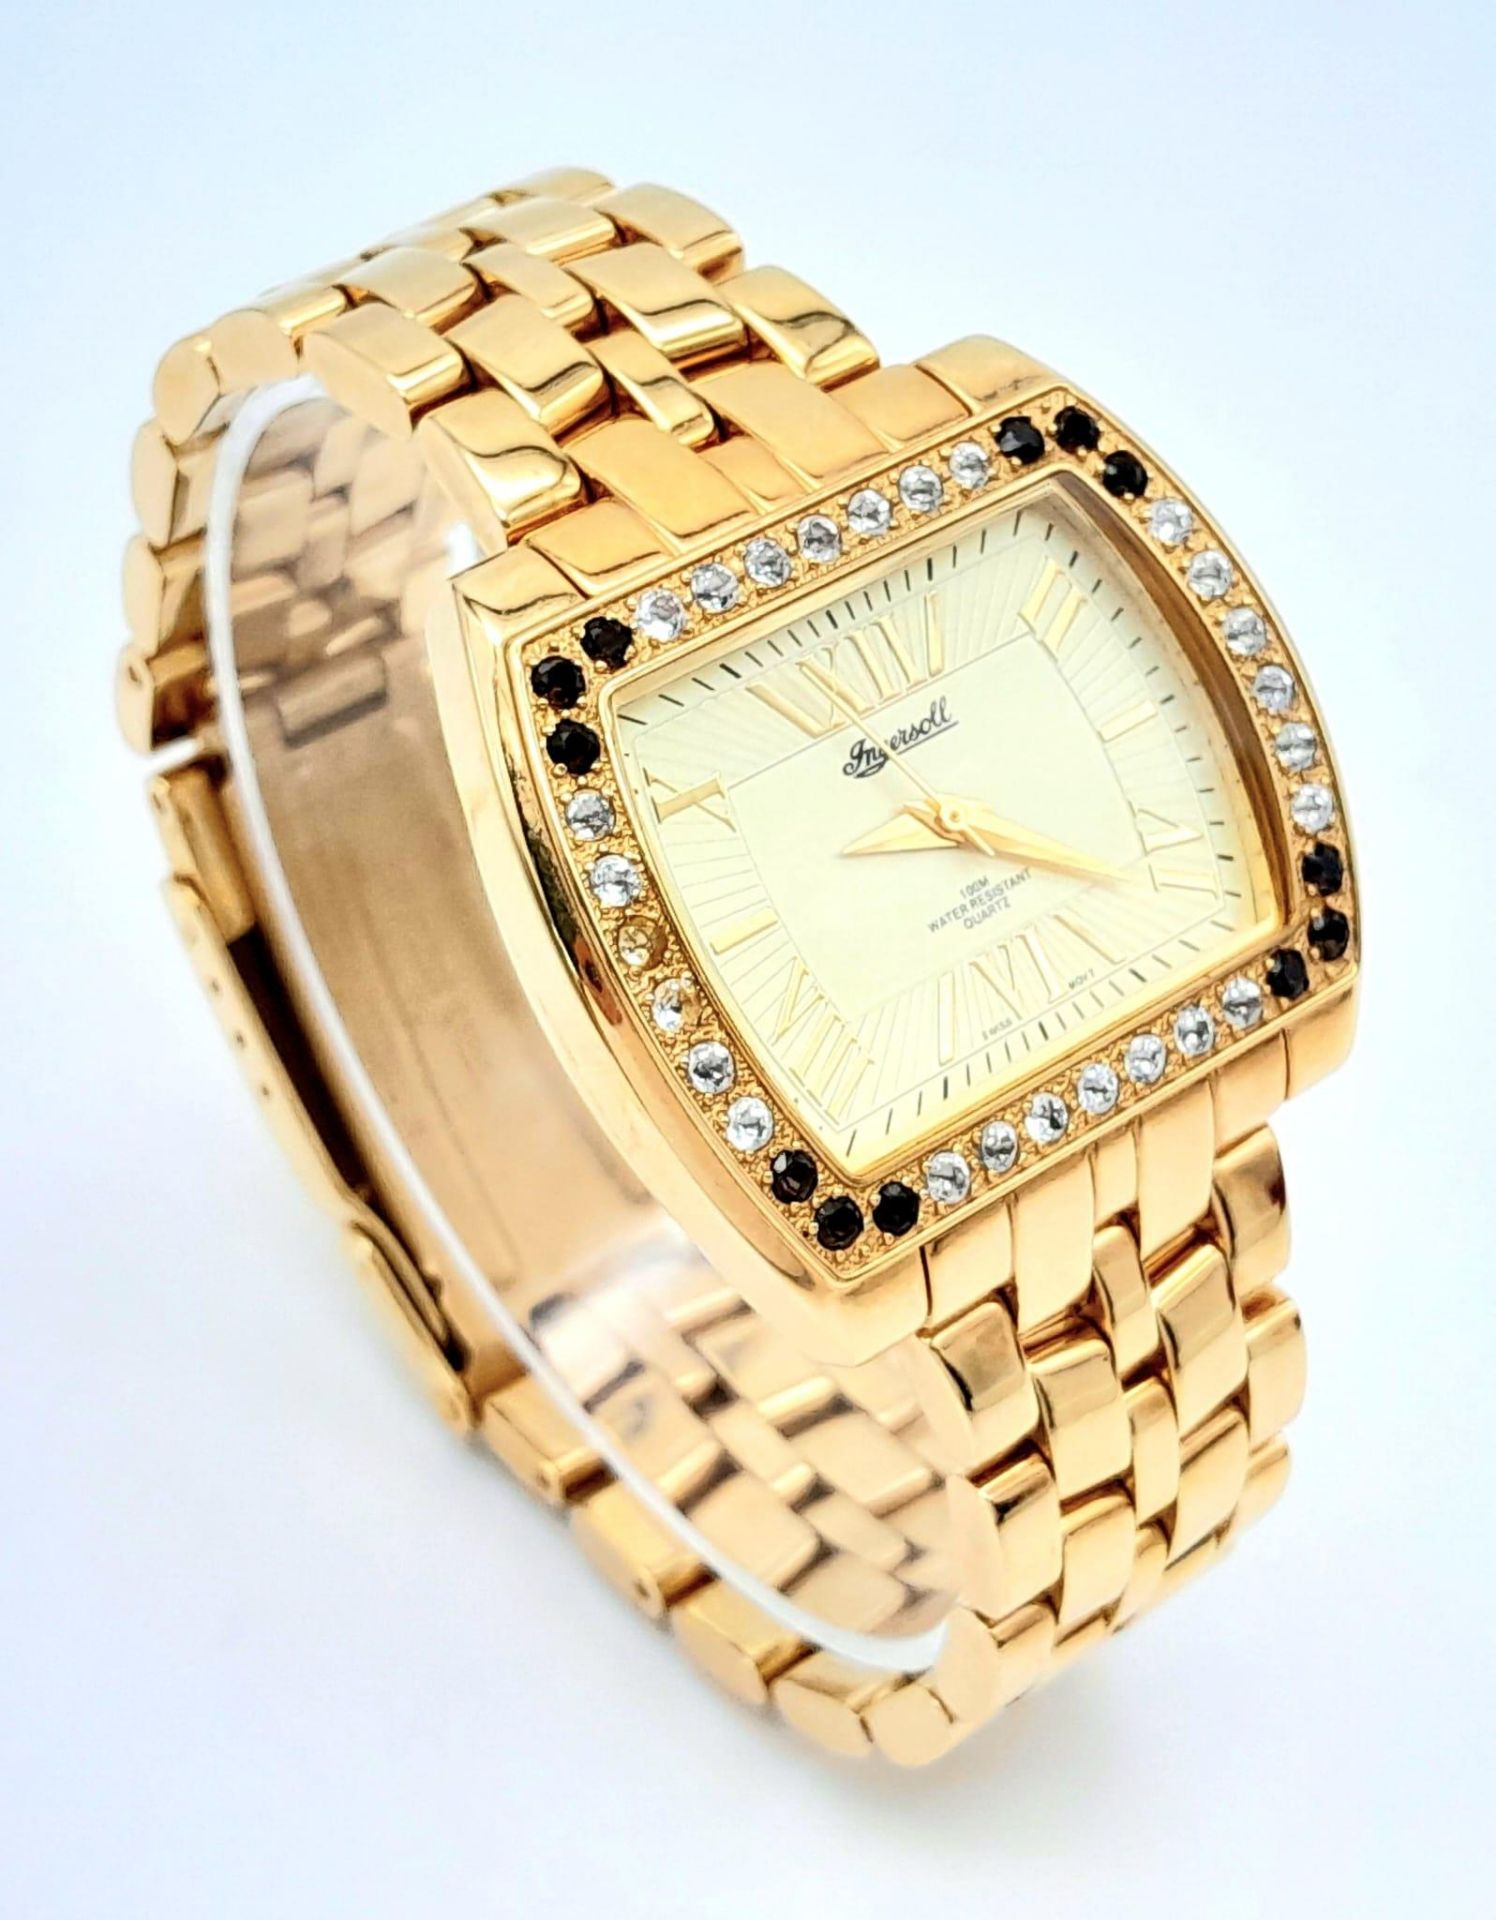 An Ingersoll Gold Plated Stone Set Quartz Ladies Watch. Gold plated bracelet and case - 38mm. - Image 3 of 6